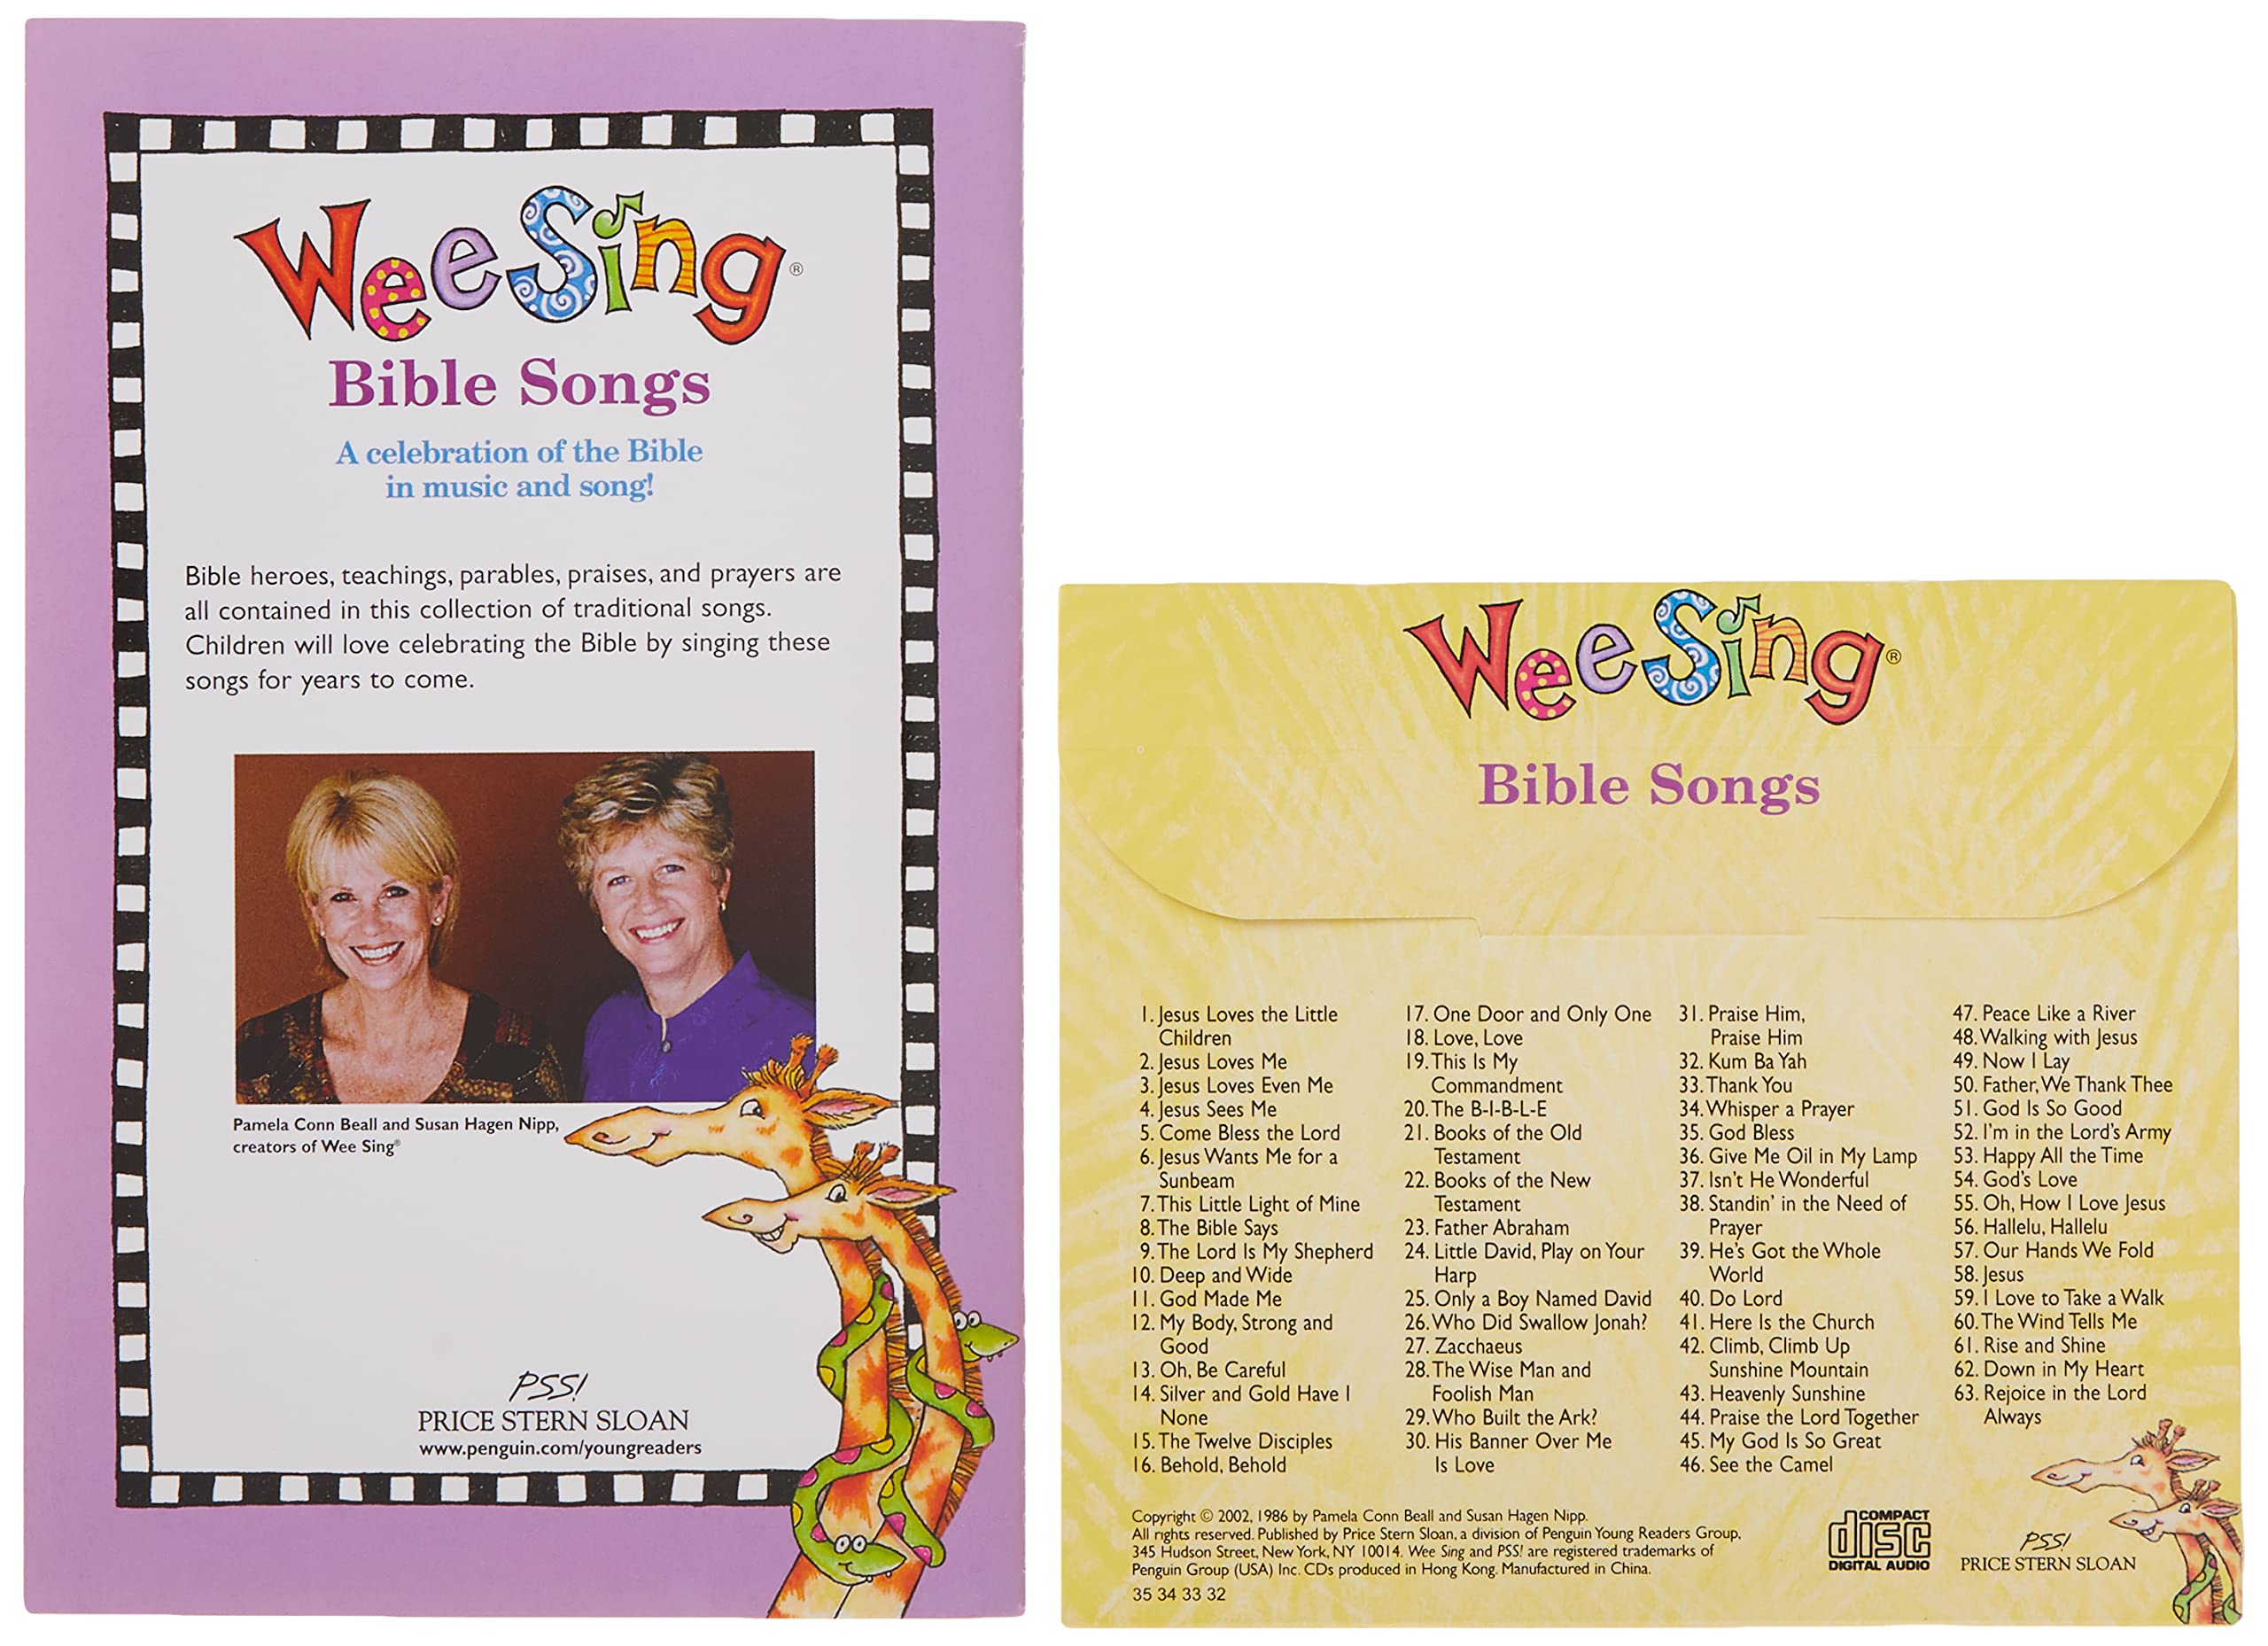 Wee Sing Bible Songs (Wee Sing) CD and Book Edition